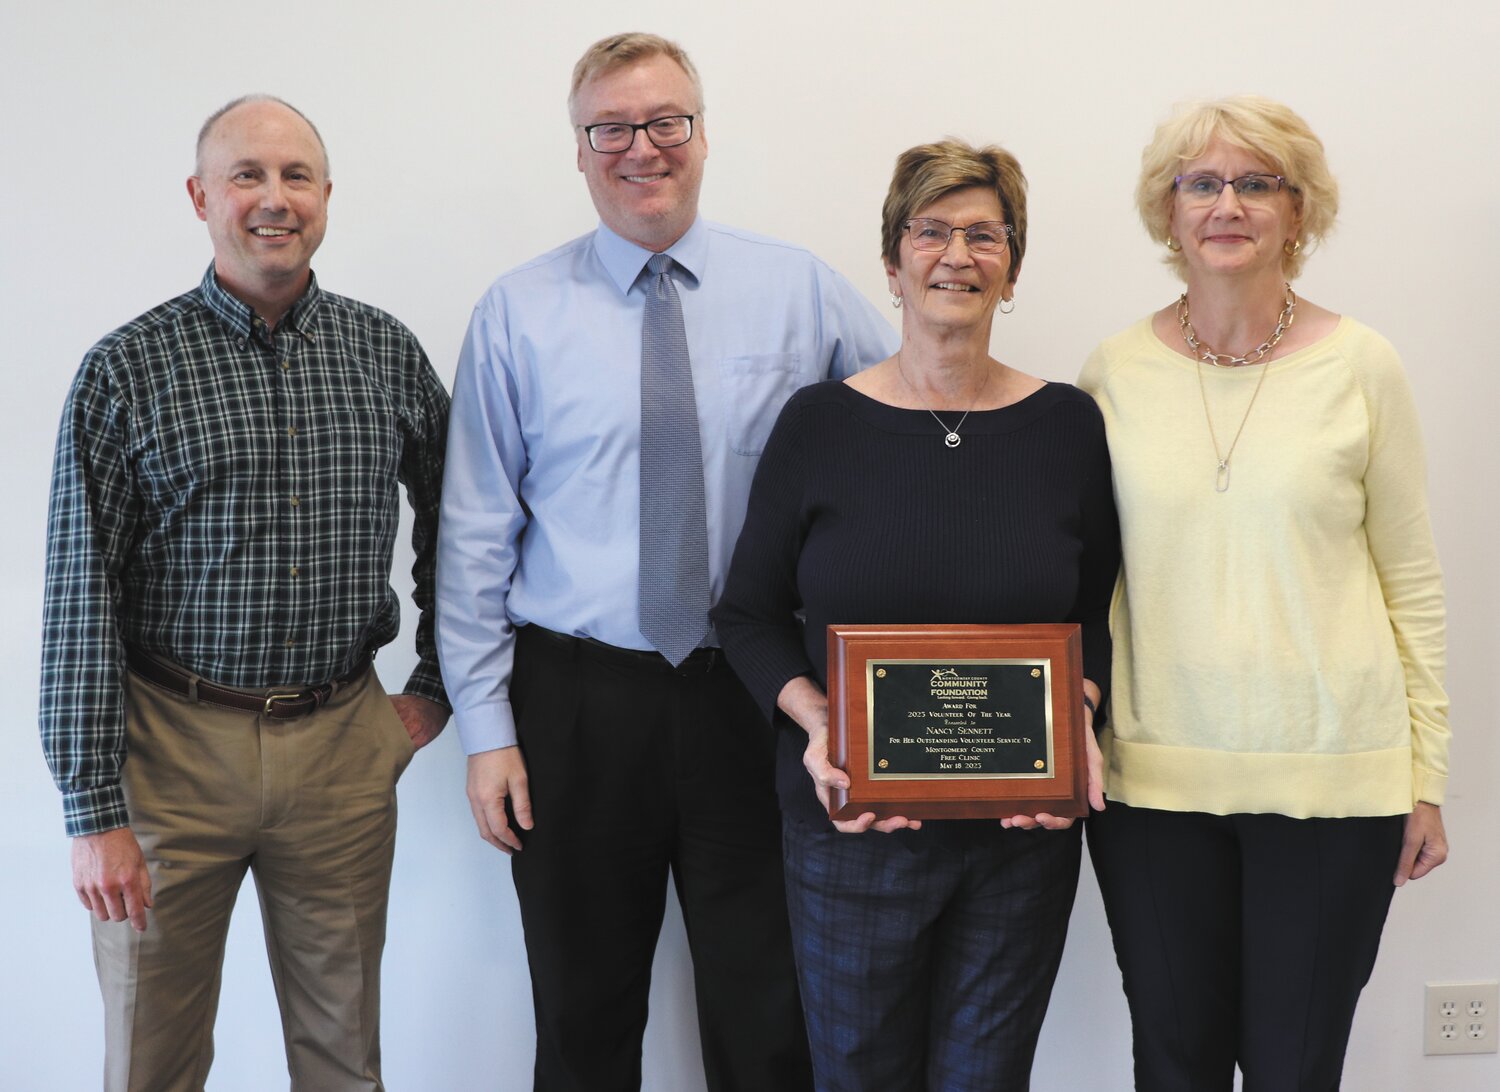 Nancy Sennett, second from right, was named MCCF’s 2023 Volunteer of the Year for her service to the Montgomery County Free Clinic. Pictured with her are, from left, Dr. John Roberts, Free Clinic board member and Chief Medical Officer, David Johnson, Executive Director, Sennett and Donna Hendrickson, board member.